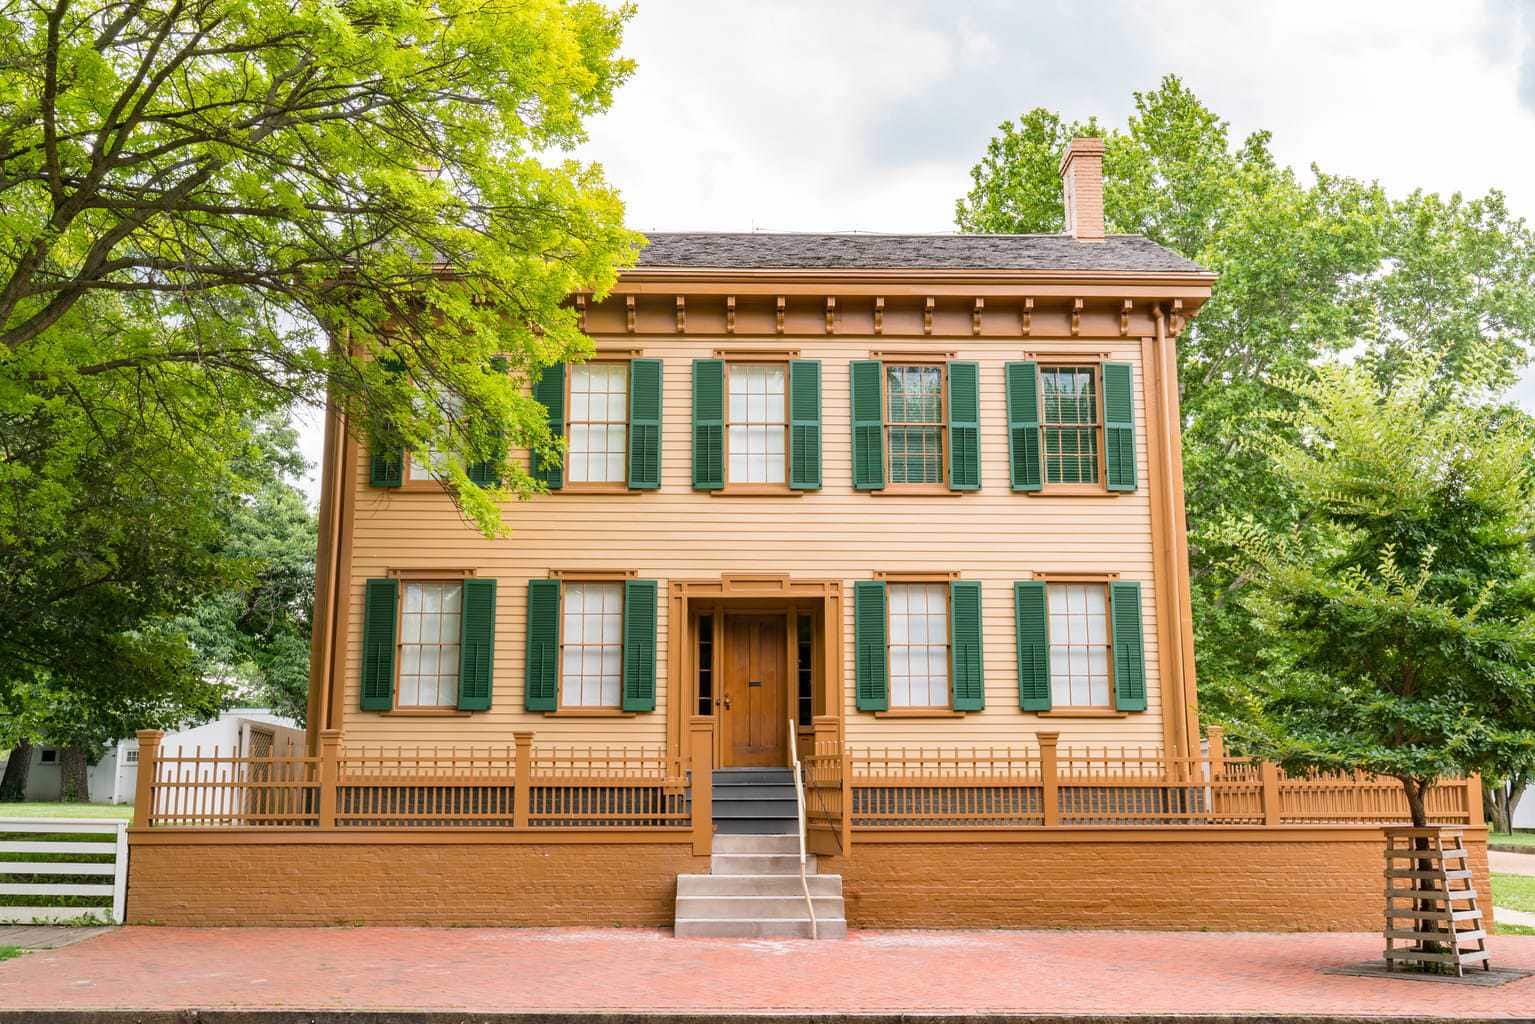 Springfield Home of Abraham Lincoln